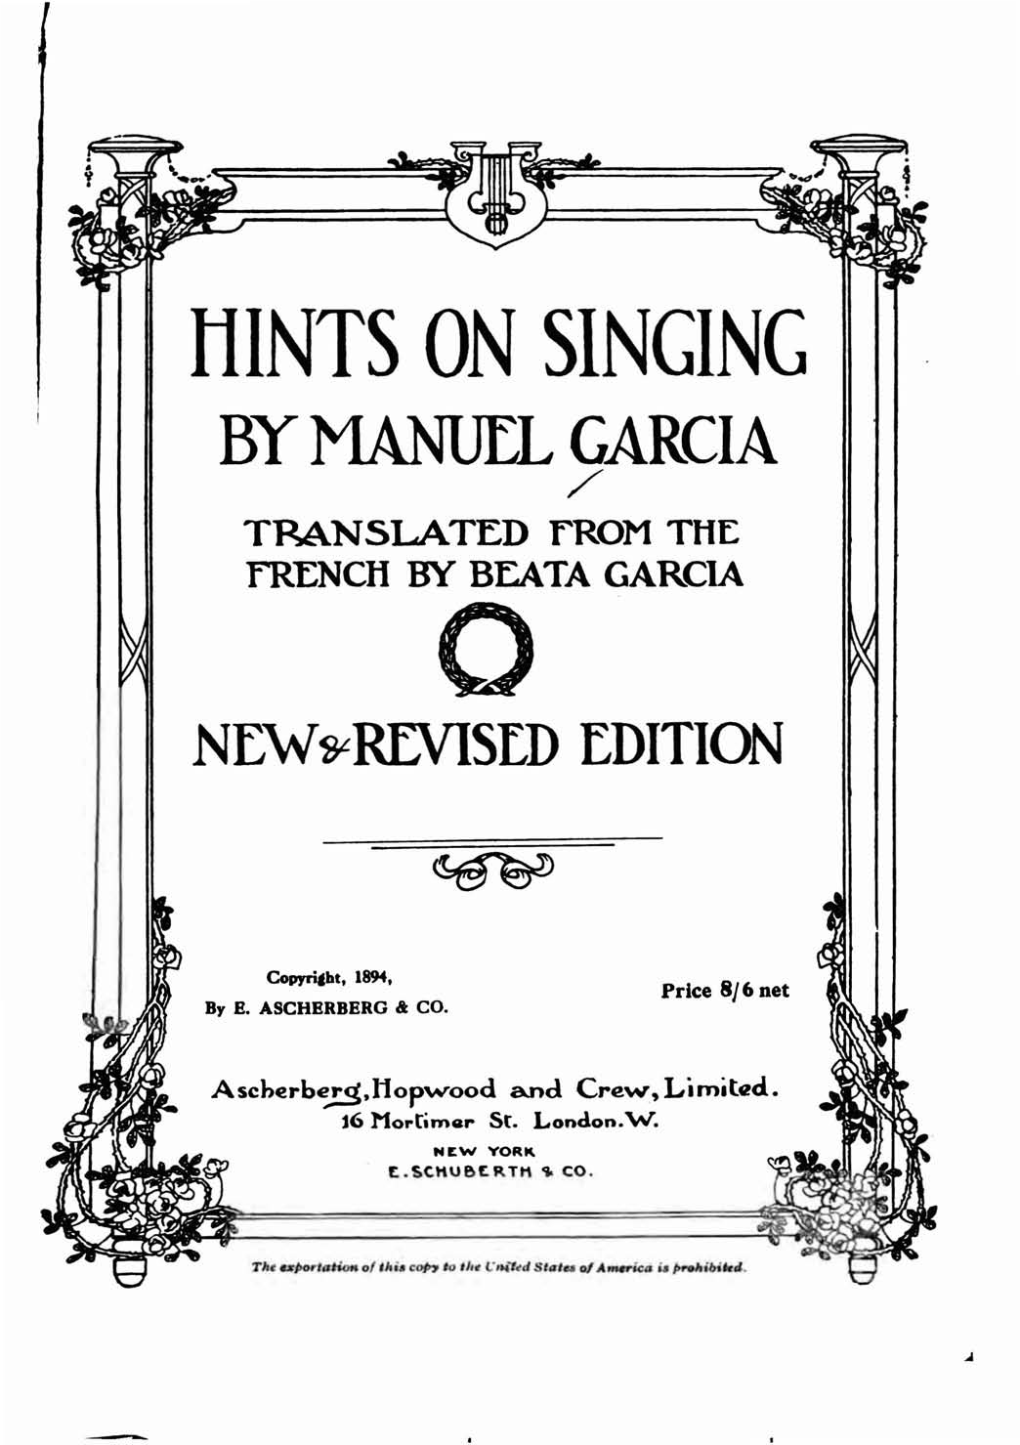 I1INTS on SINGING by MANUEL GARCIA / TRANSLATED from the Frenctl by BEATA GARCIA O Newstrevised EDITION